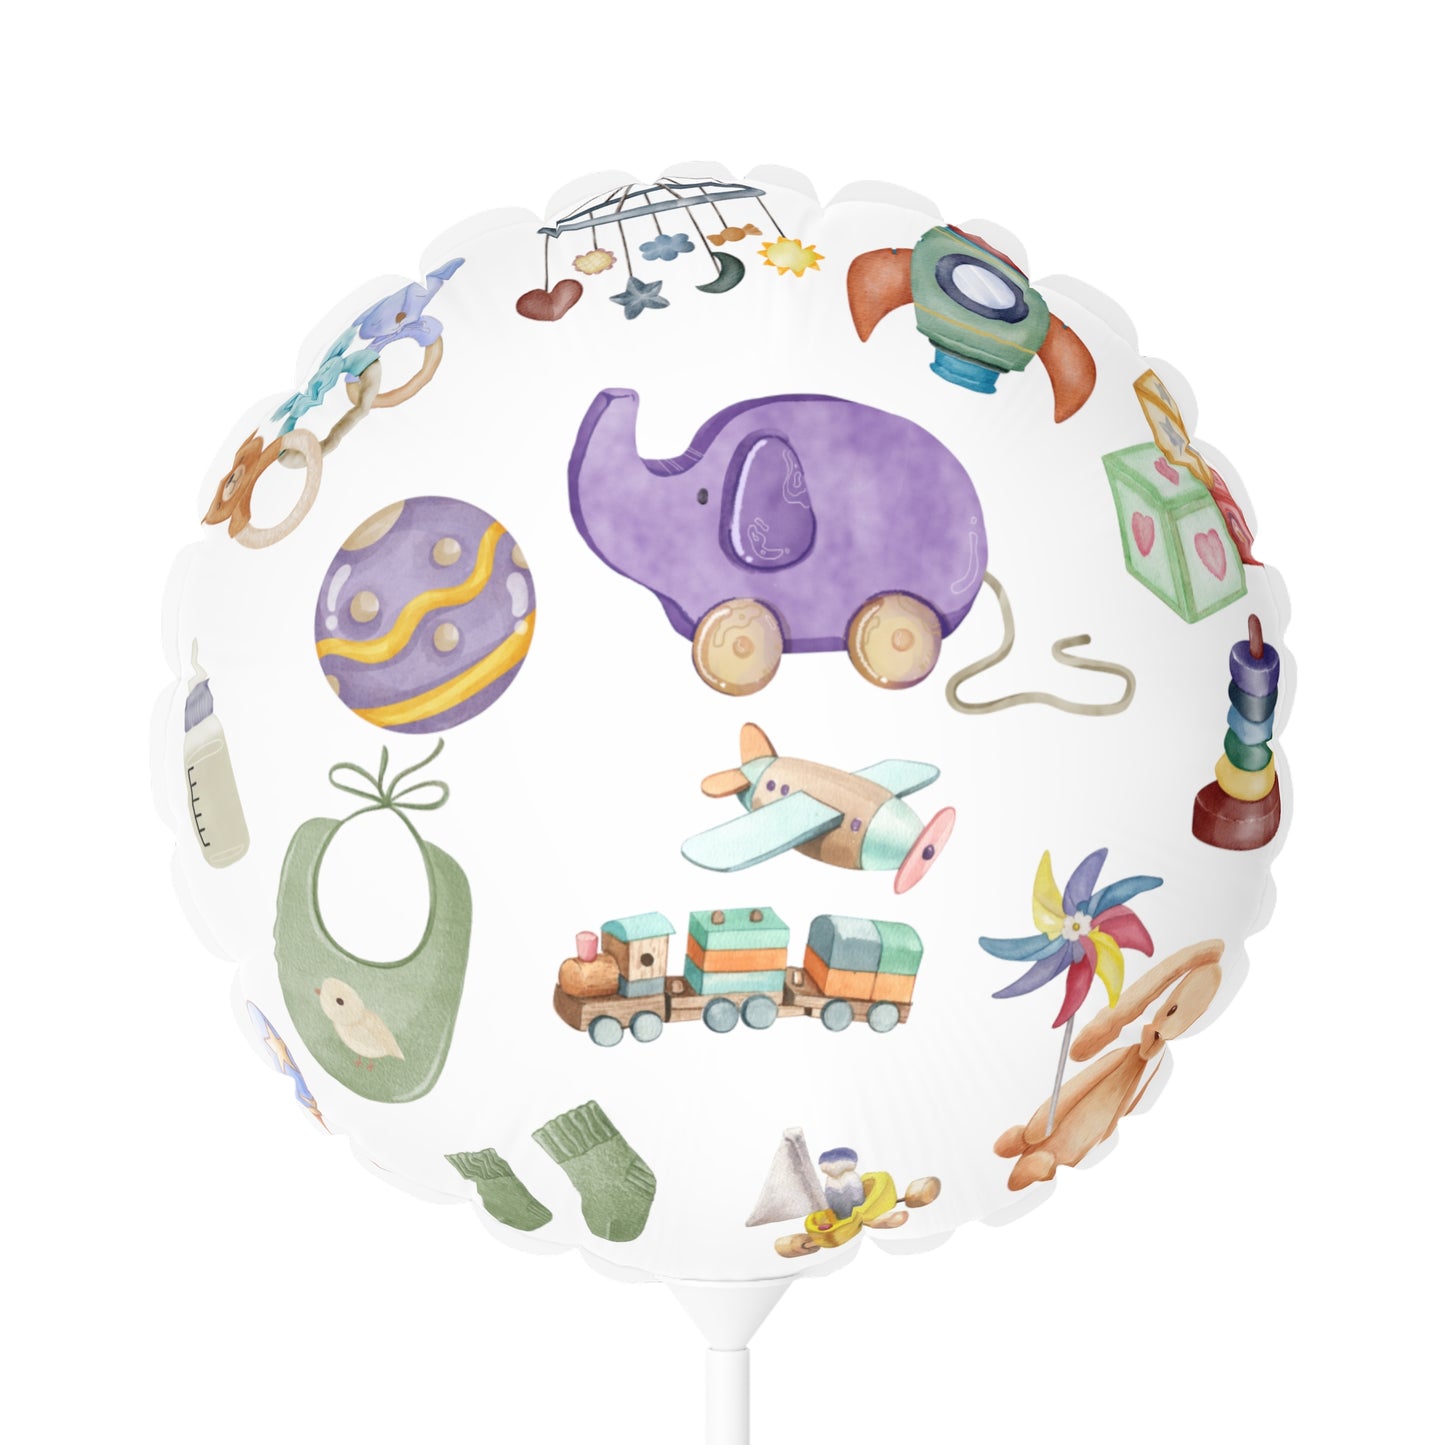 New Baby - Neutral | New Arrival Balloon (Round and Heart-shaped), Air Only 11"